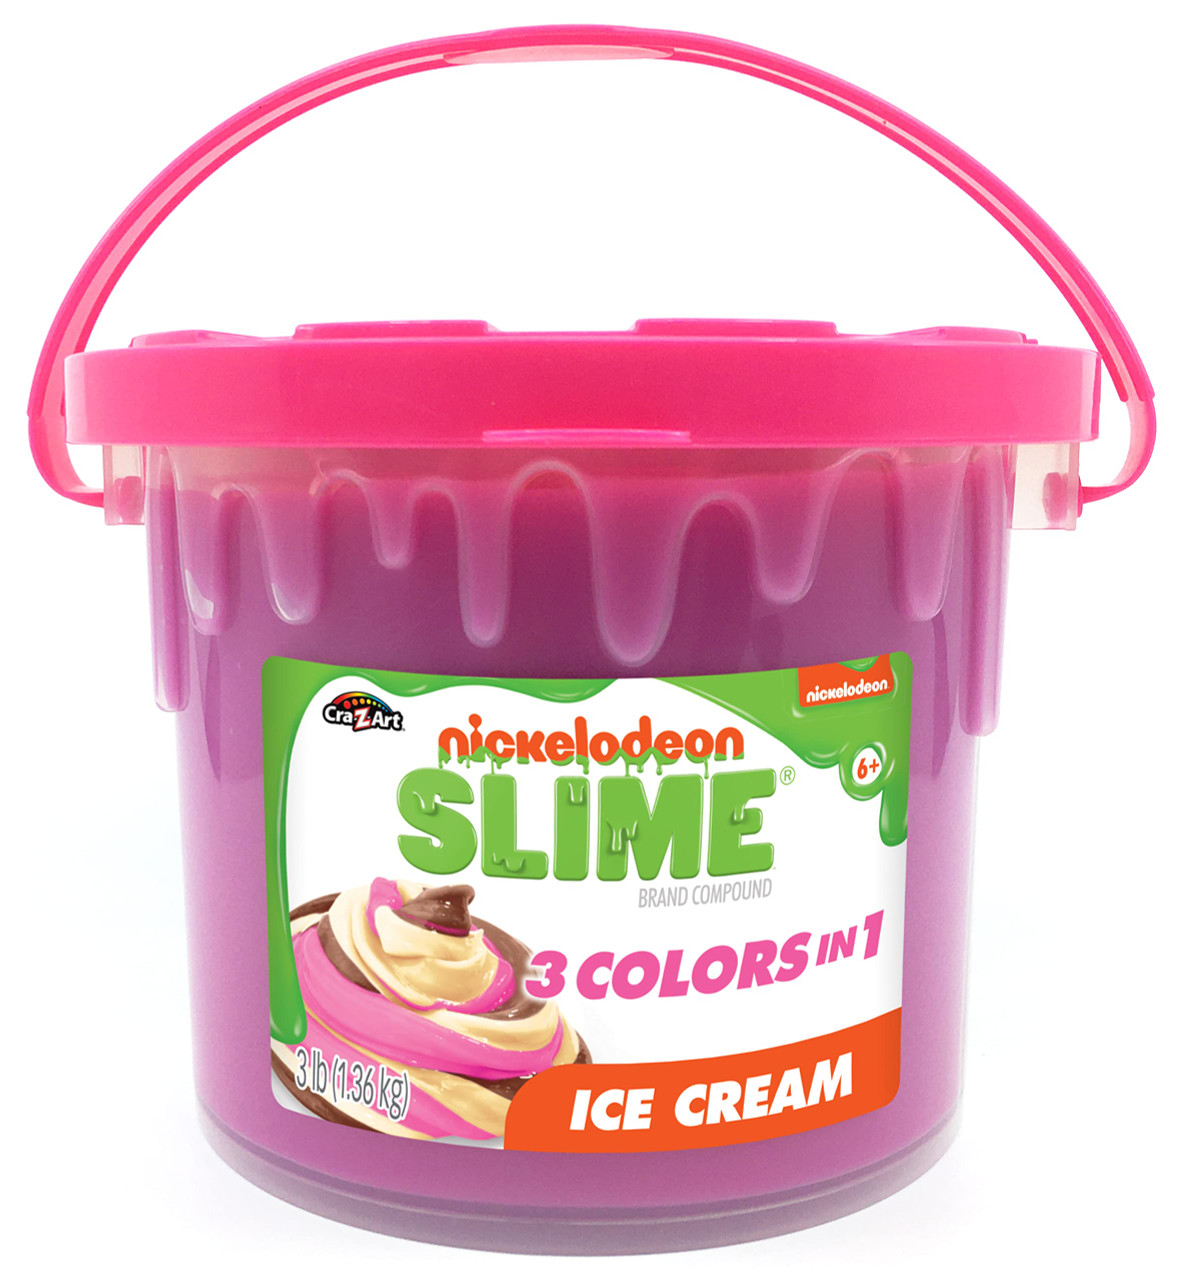 Nickelodeon Slime 3LB Ice Cream Premade Slime Bucket – 3 Colors-in-1  Strawberry, Vanilla and Chocolate Colored Slime - Toys 4 U